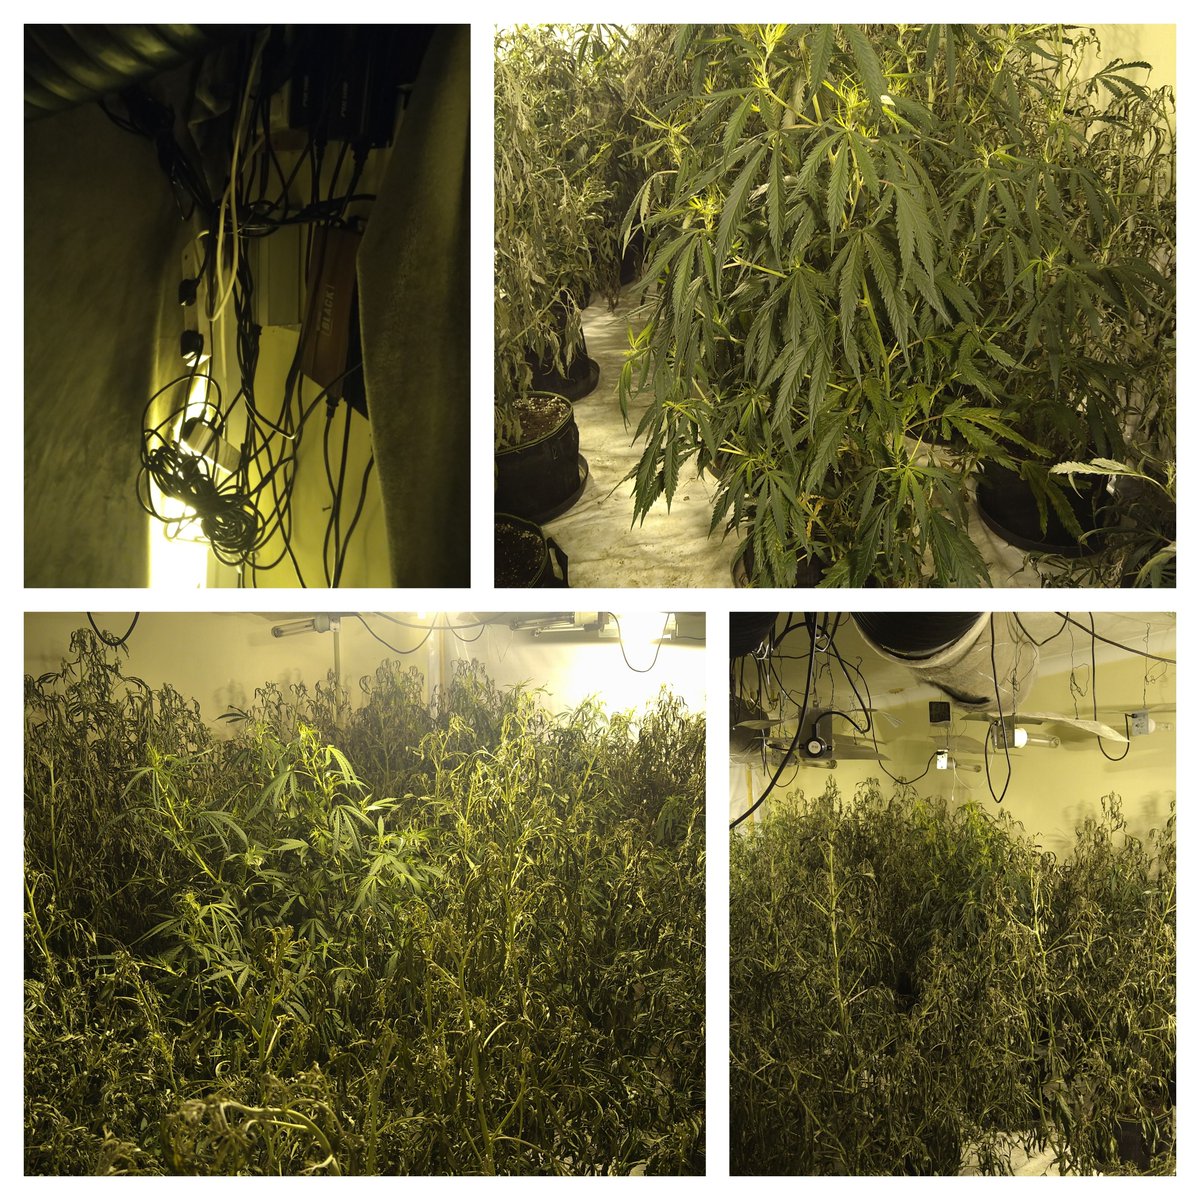 Officers were called to an address in Dunscroft this morning after a repossession order was placed on a property and a cannabis set up was found.
This appears to be a good example of what happens when you don’t water your plants in the middle of a heat wave!